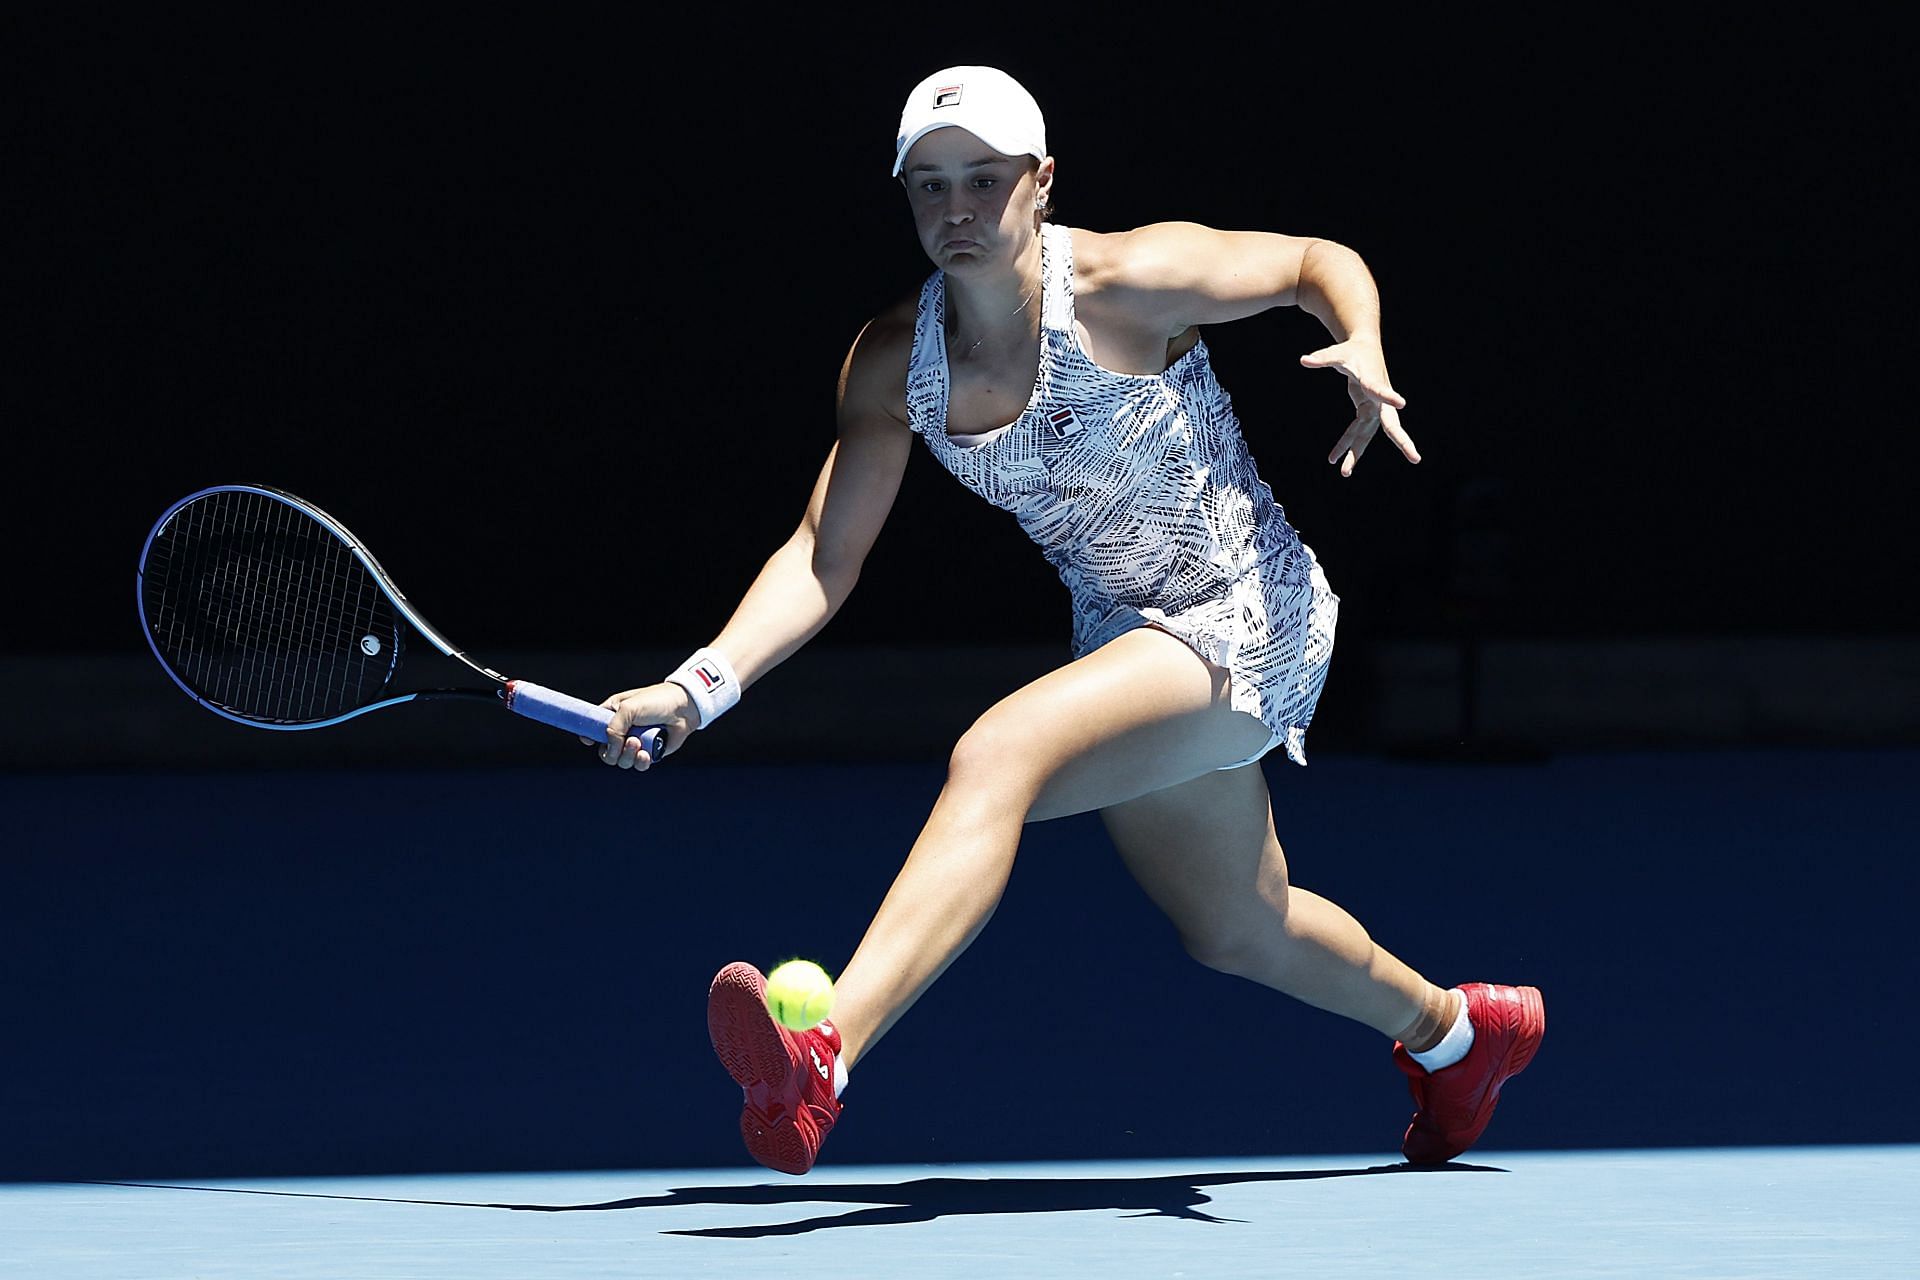 Ashleigh Barty in action at 2022 Australian Open